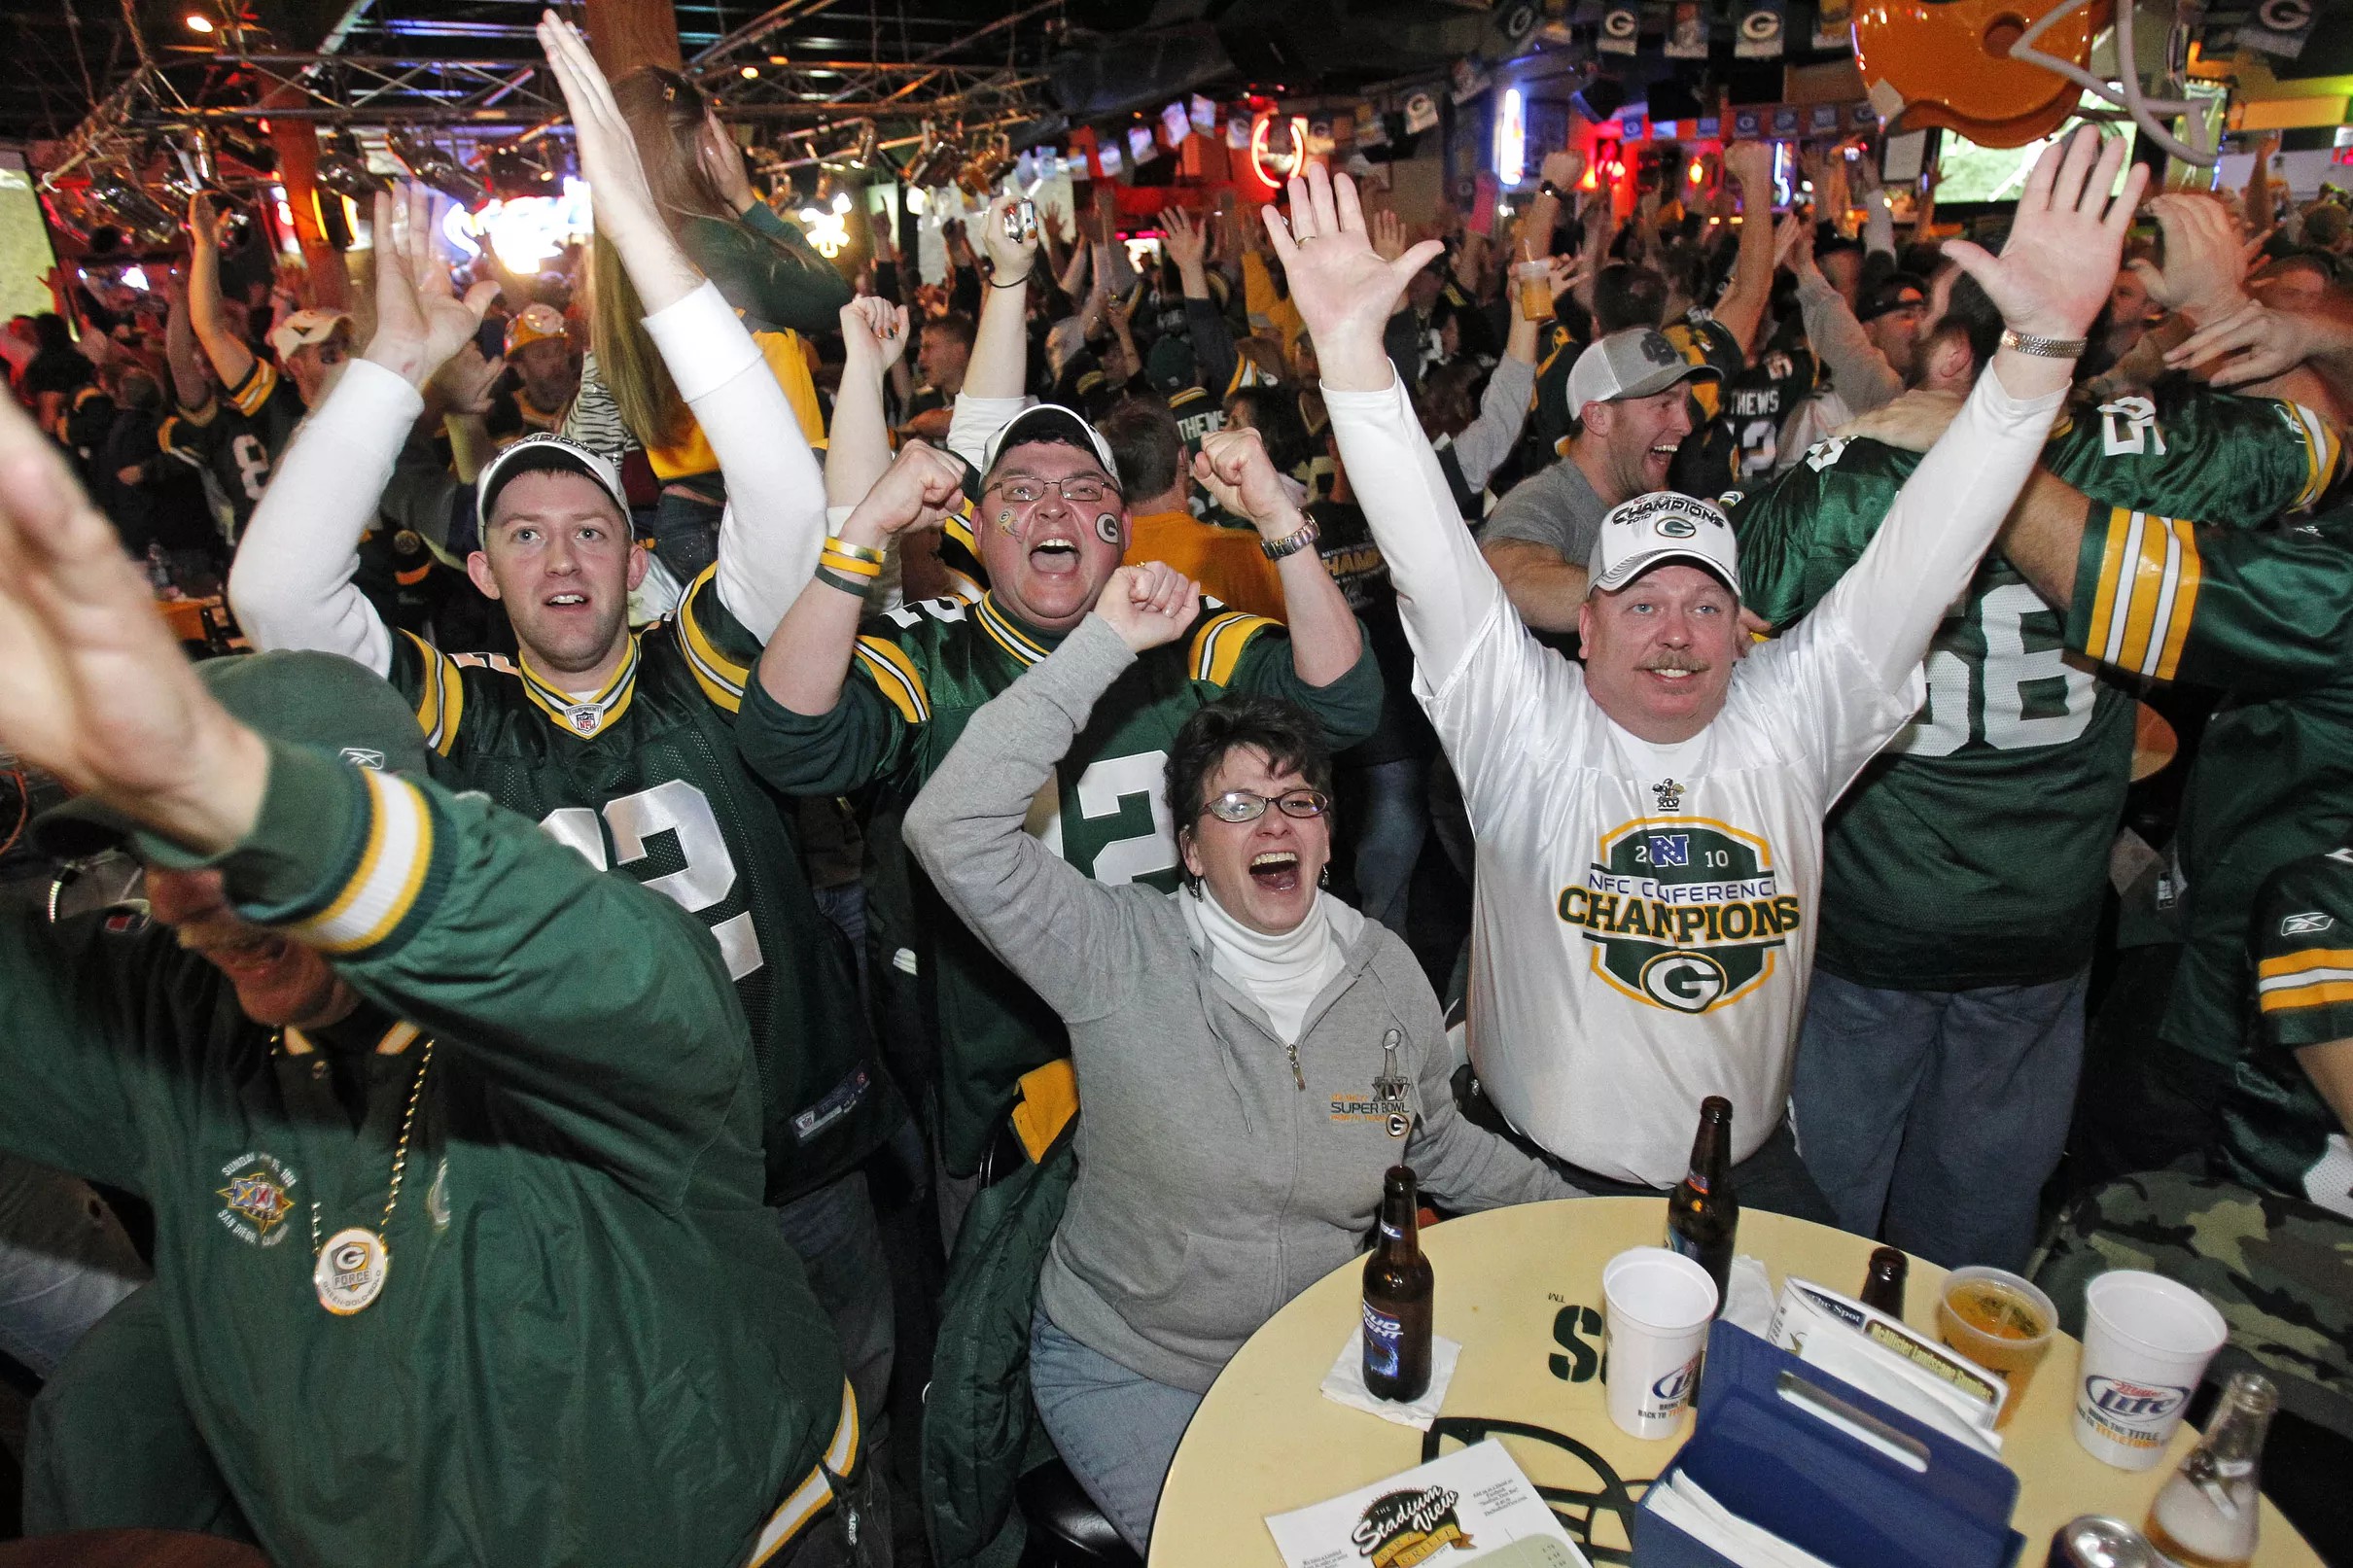 Why The Local Packers Bar Is The Best Place For A Green Bay Fan To Watch Super Bowl Lii